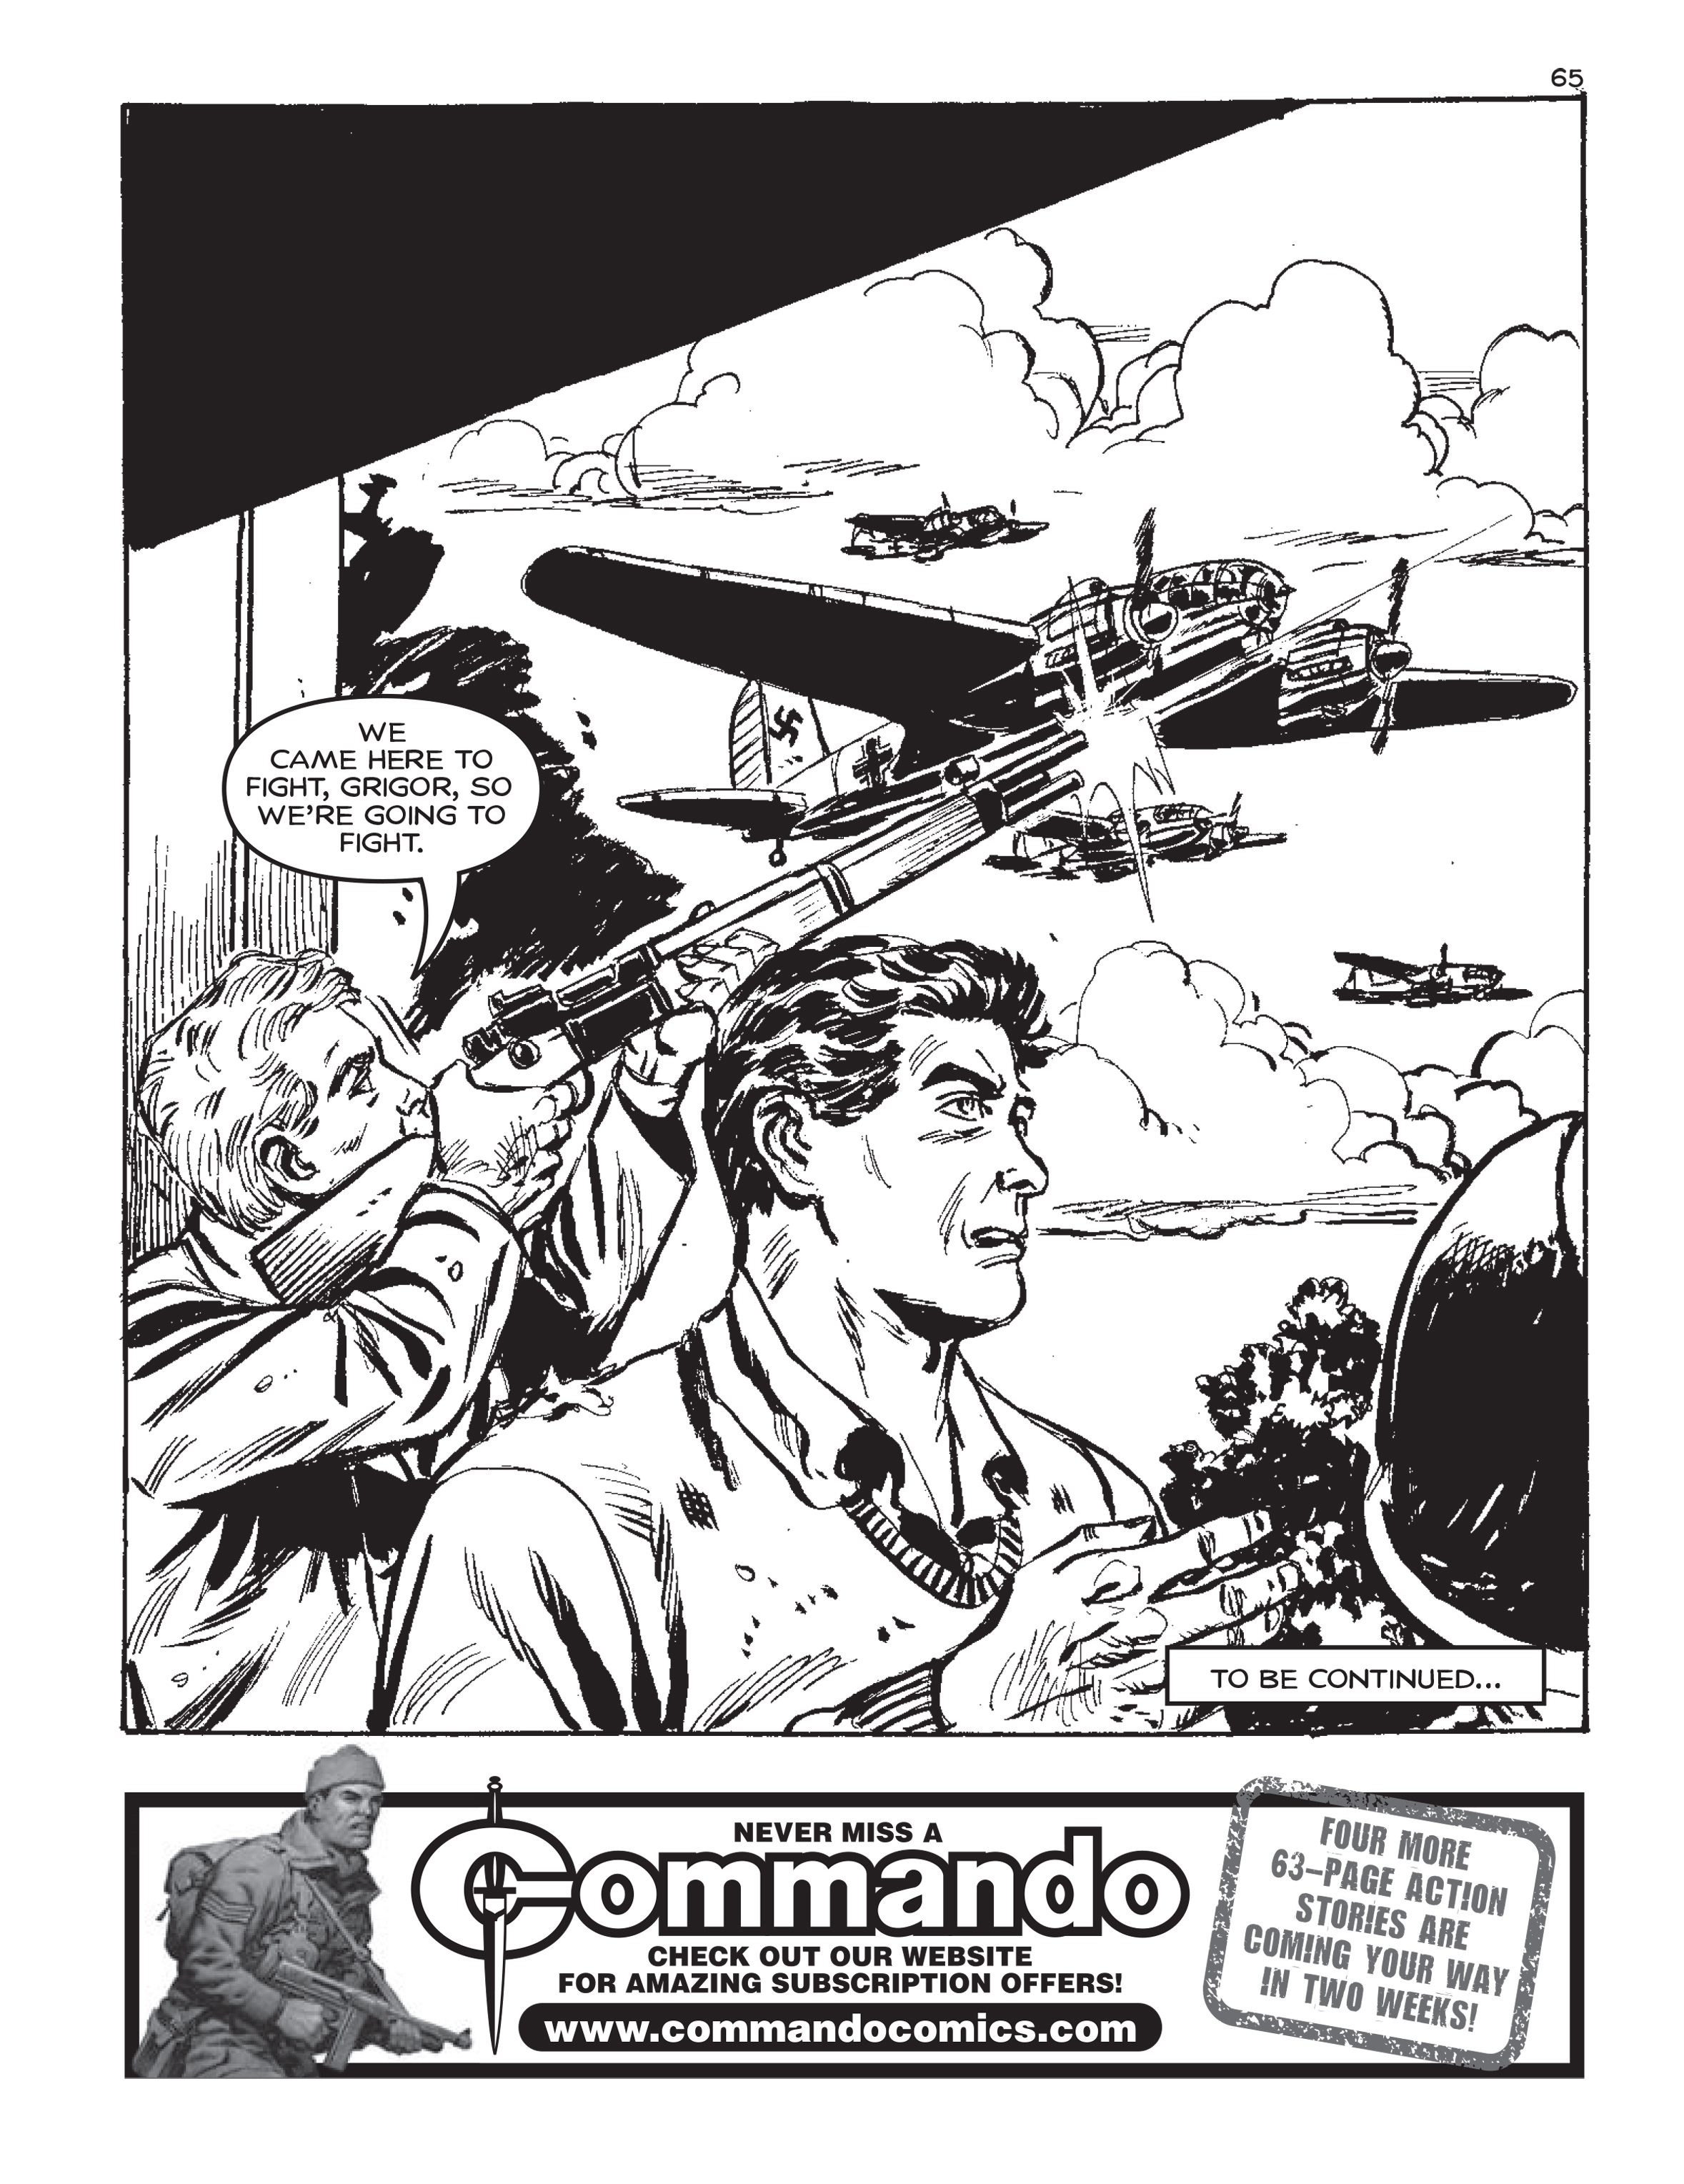 Read online Commando: For Action and Adventure comic -  Issue #5203 - 64